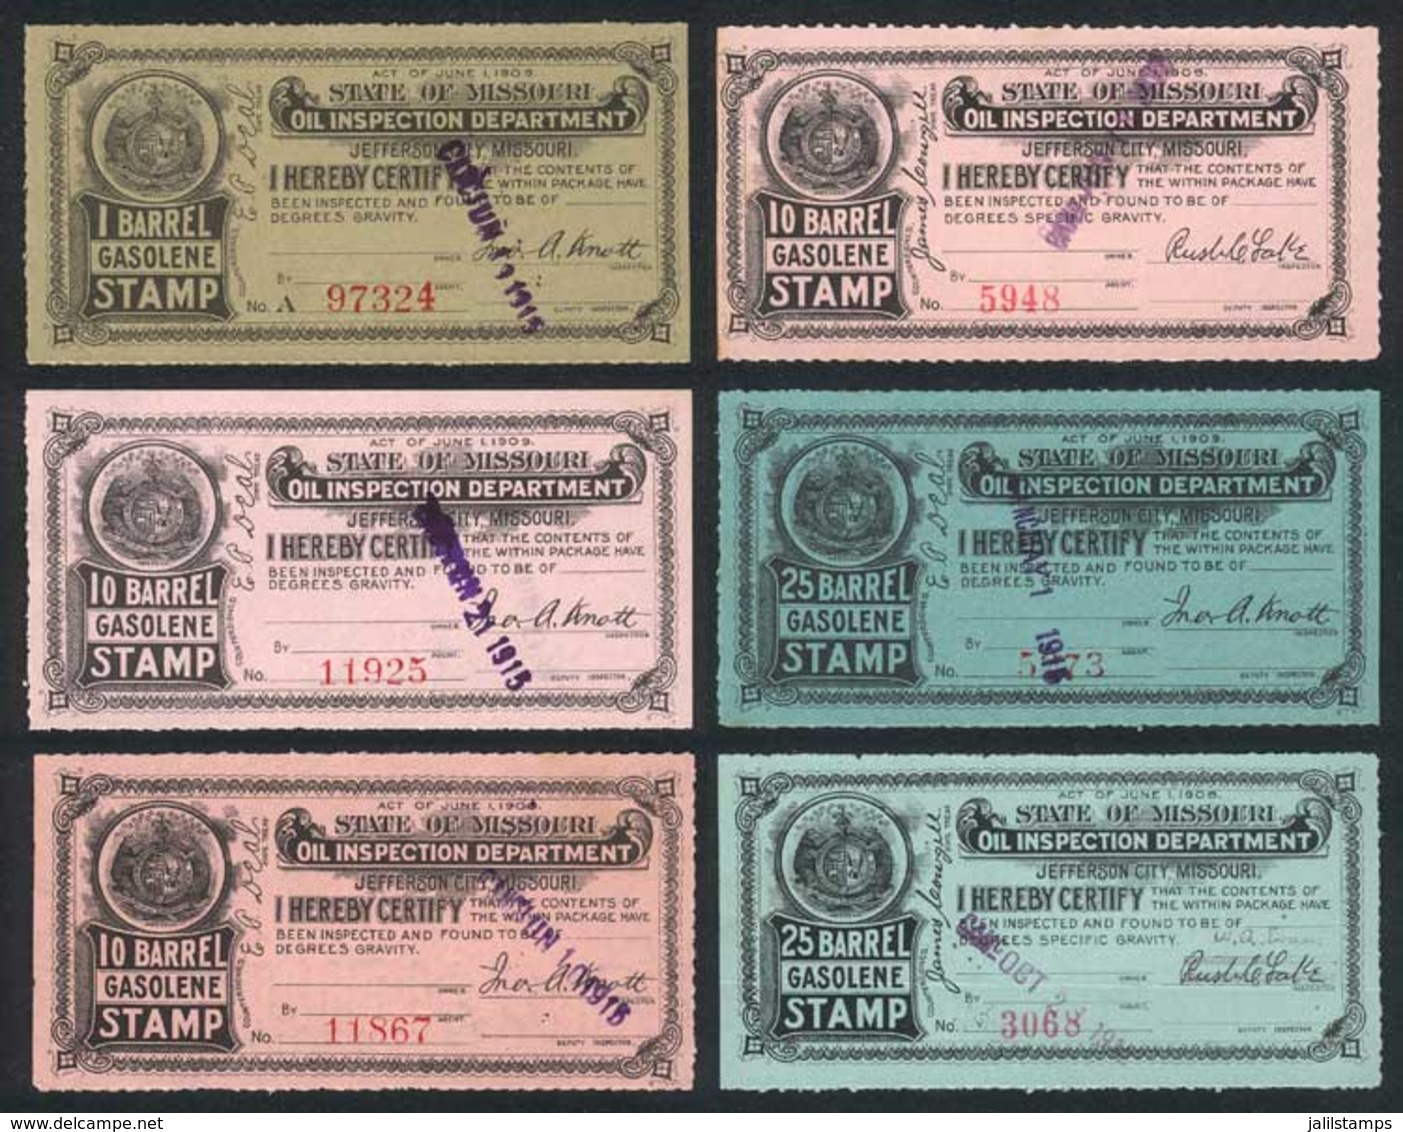 UNITED STATES: MISSOURI: Gasoline Inspection Stamps, Circa 1915, 6 Stamps Between 1 Bbl And 25 Bbl, Fine To VF Quality,  - Revenues